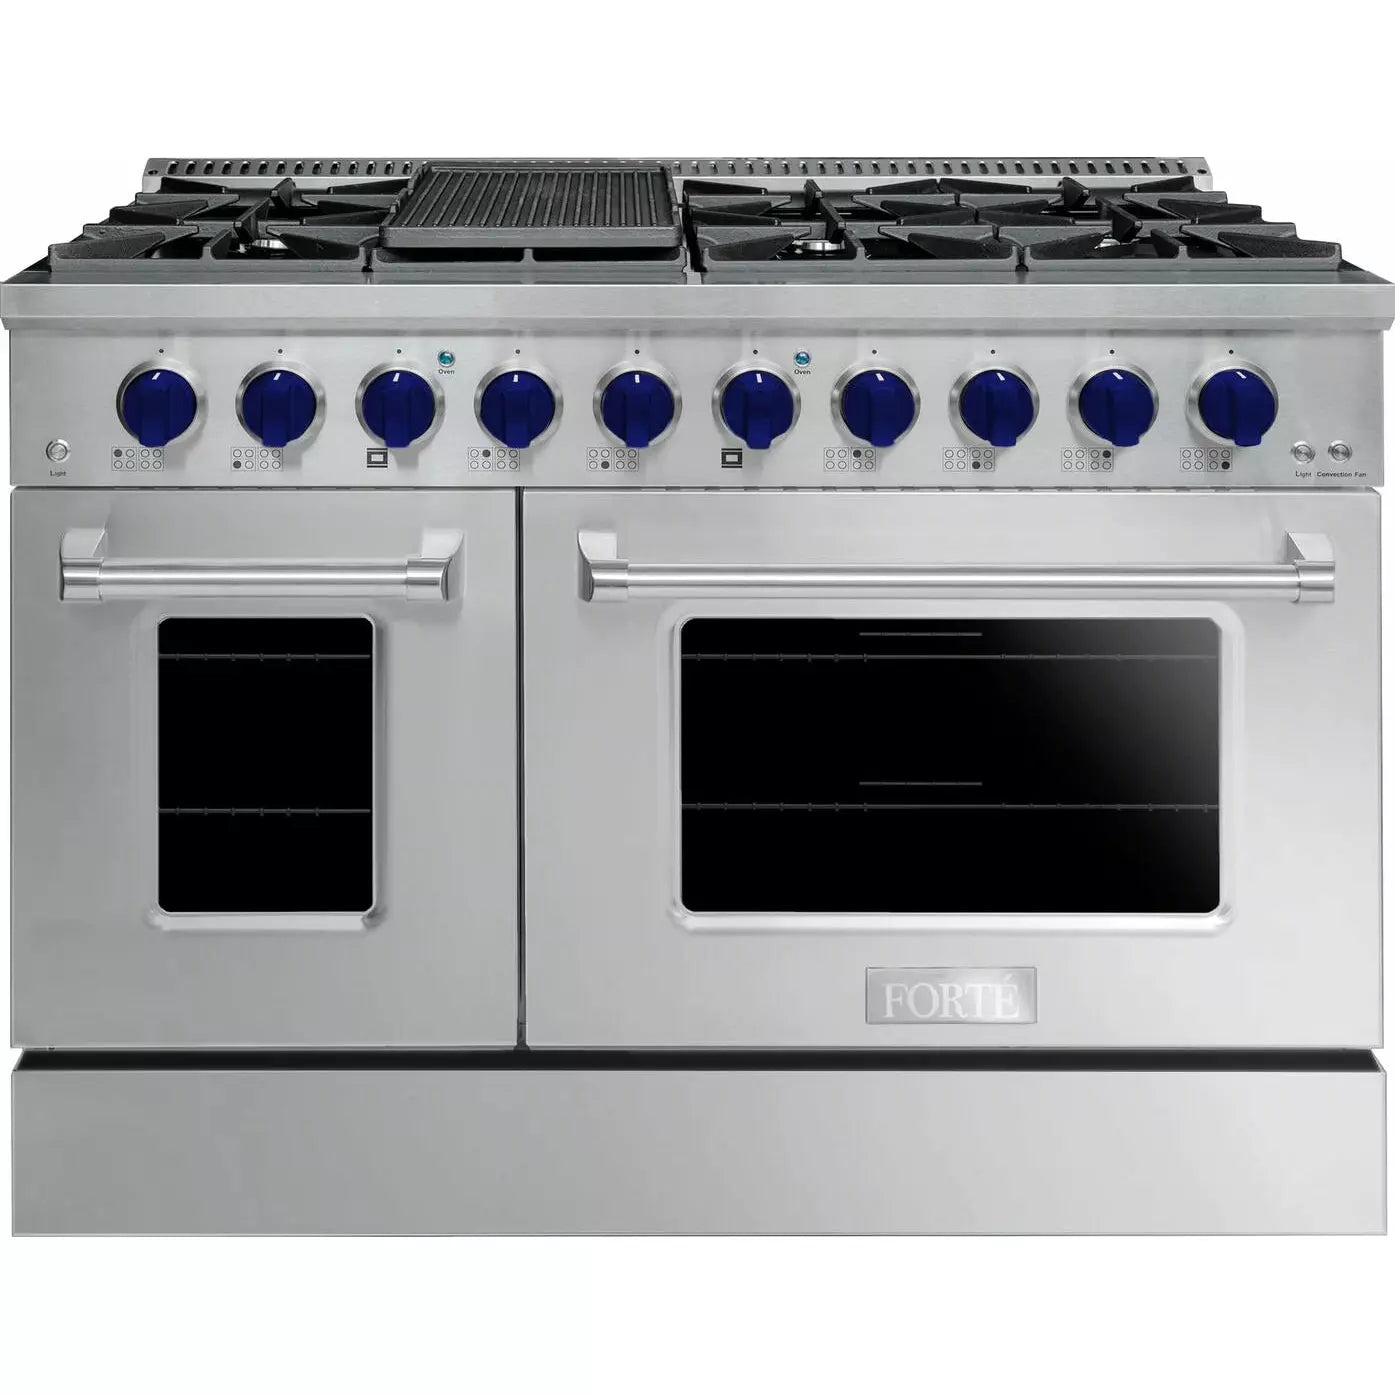 Forte 48" Freestanding All Gas Range - 8 Sealed Italian Made Burners, 5.53 cu. ft. Oven & Griddle - in Stainless Steel With Blue Knob (FGR488BSS3)